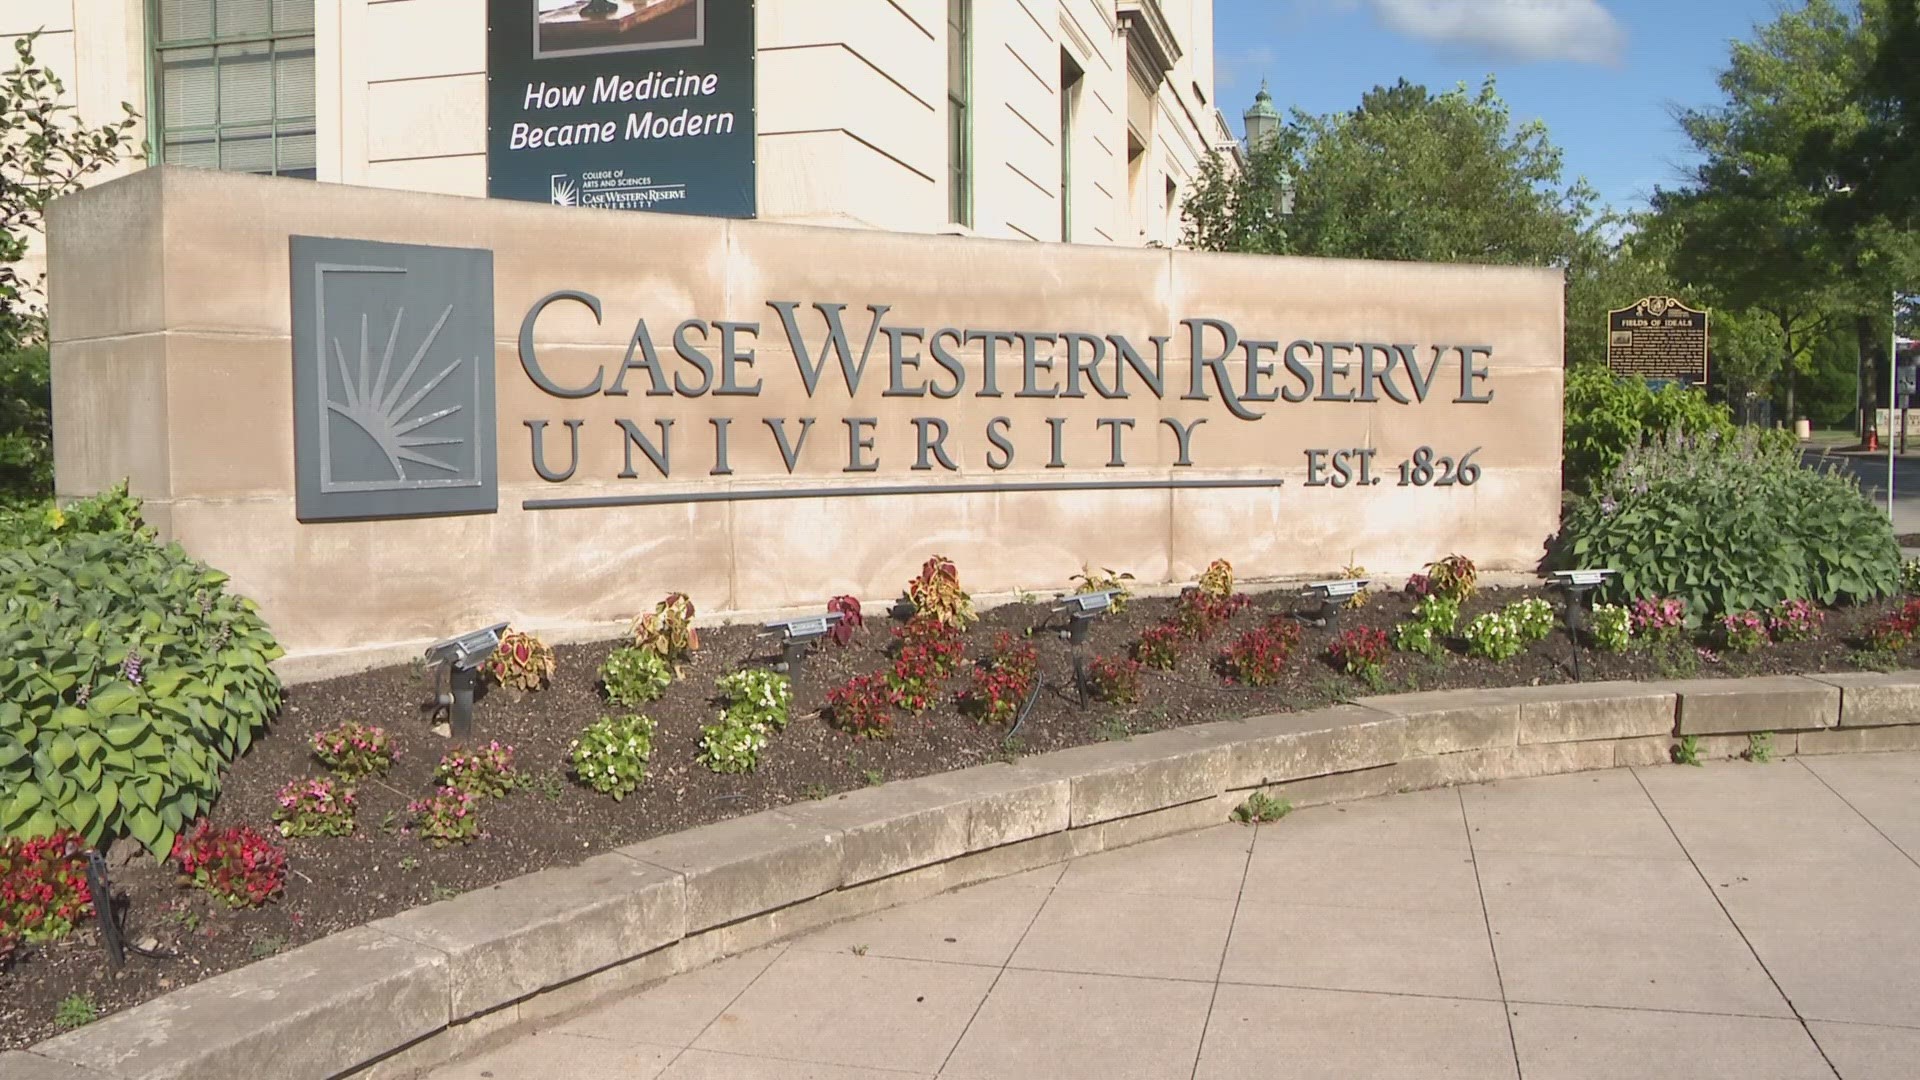 WalletHub named Case Western Reserve as the top college or university in Ohio for the fifth year in a row. Kenyon College was No. 2, followed by Oberlin College.